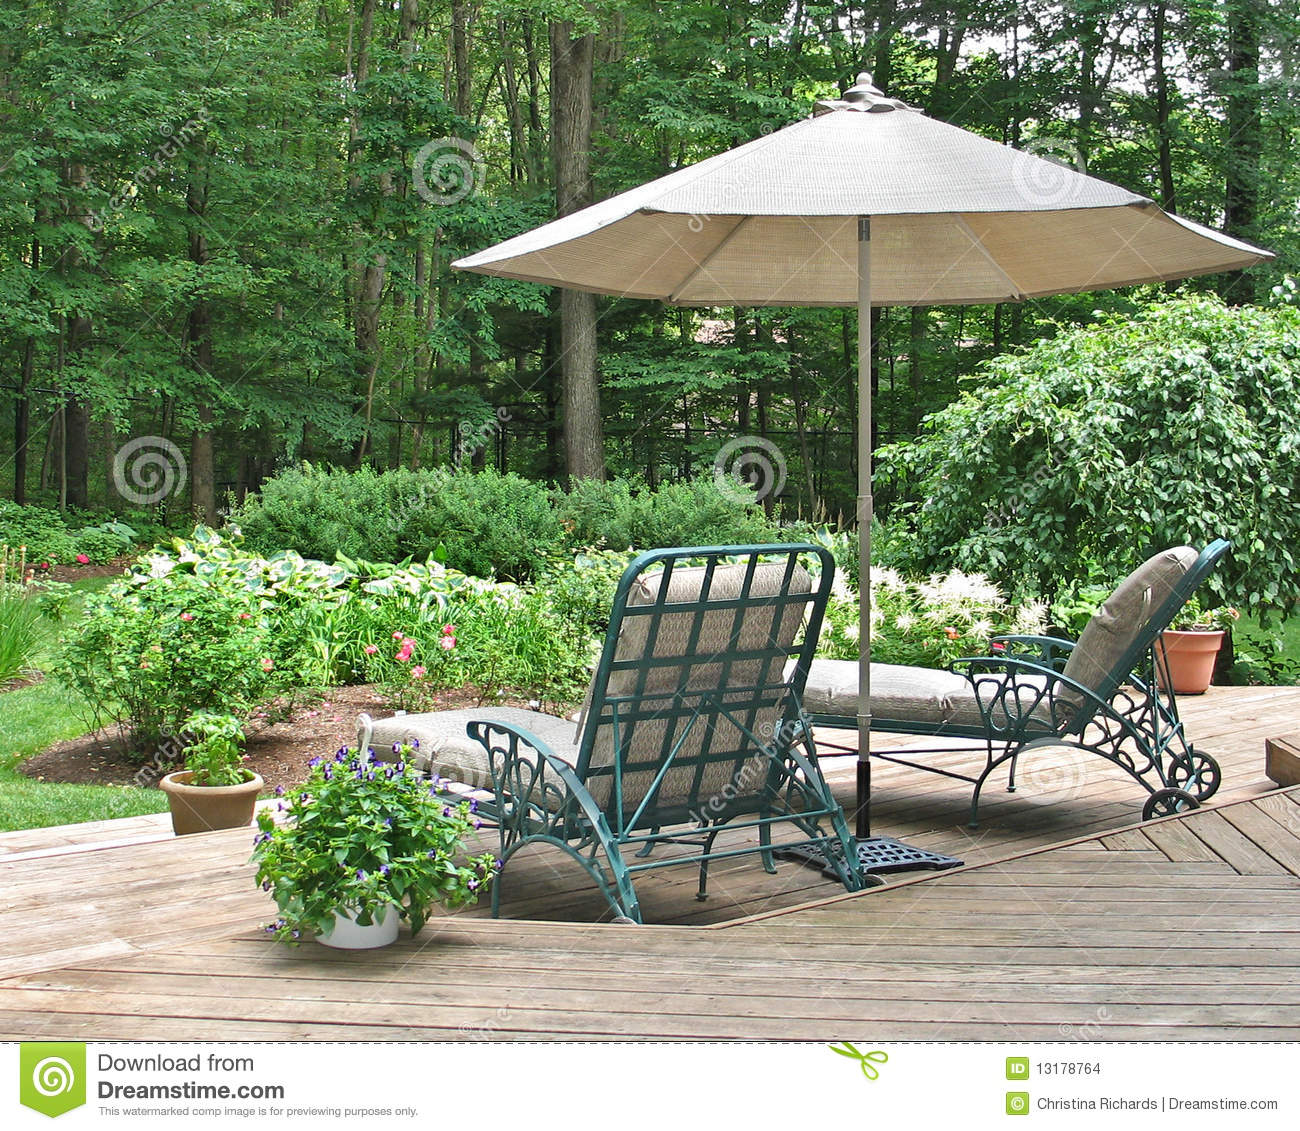 Lounge Chairs Under Patio Umbrella Stock Images   Image  13178764